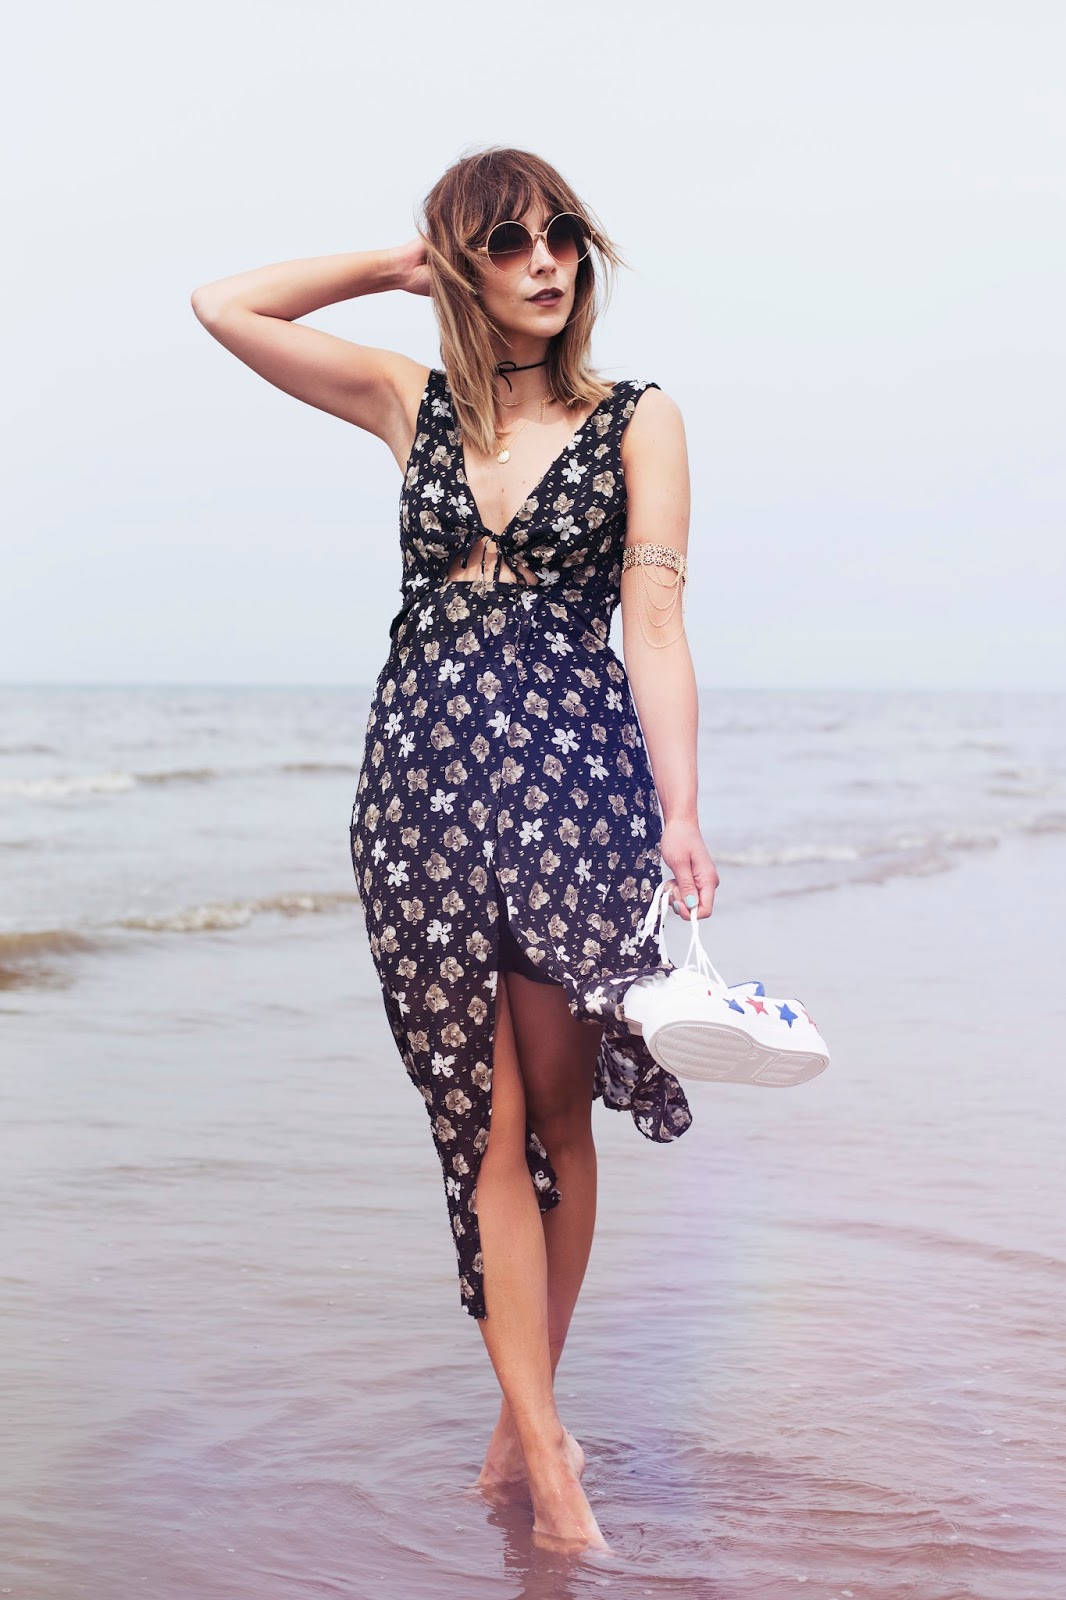 THE ULTIMATE SUMMER DRESS